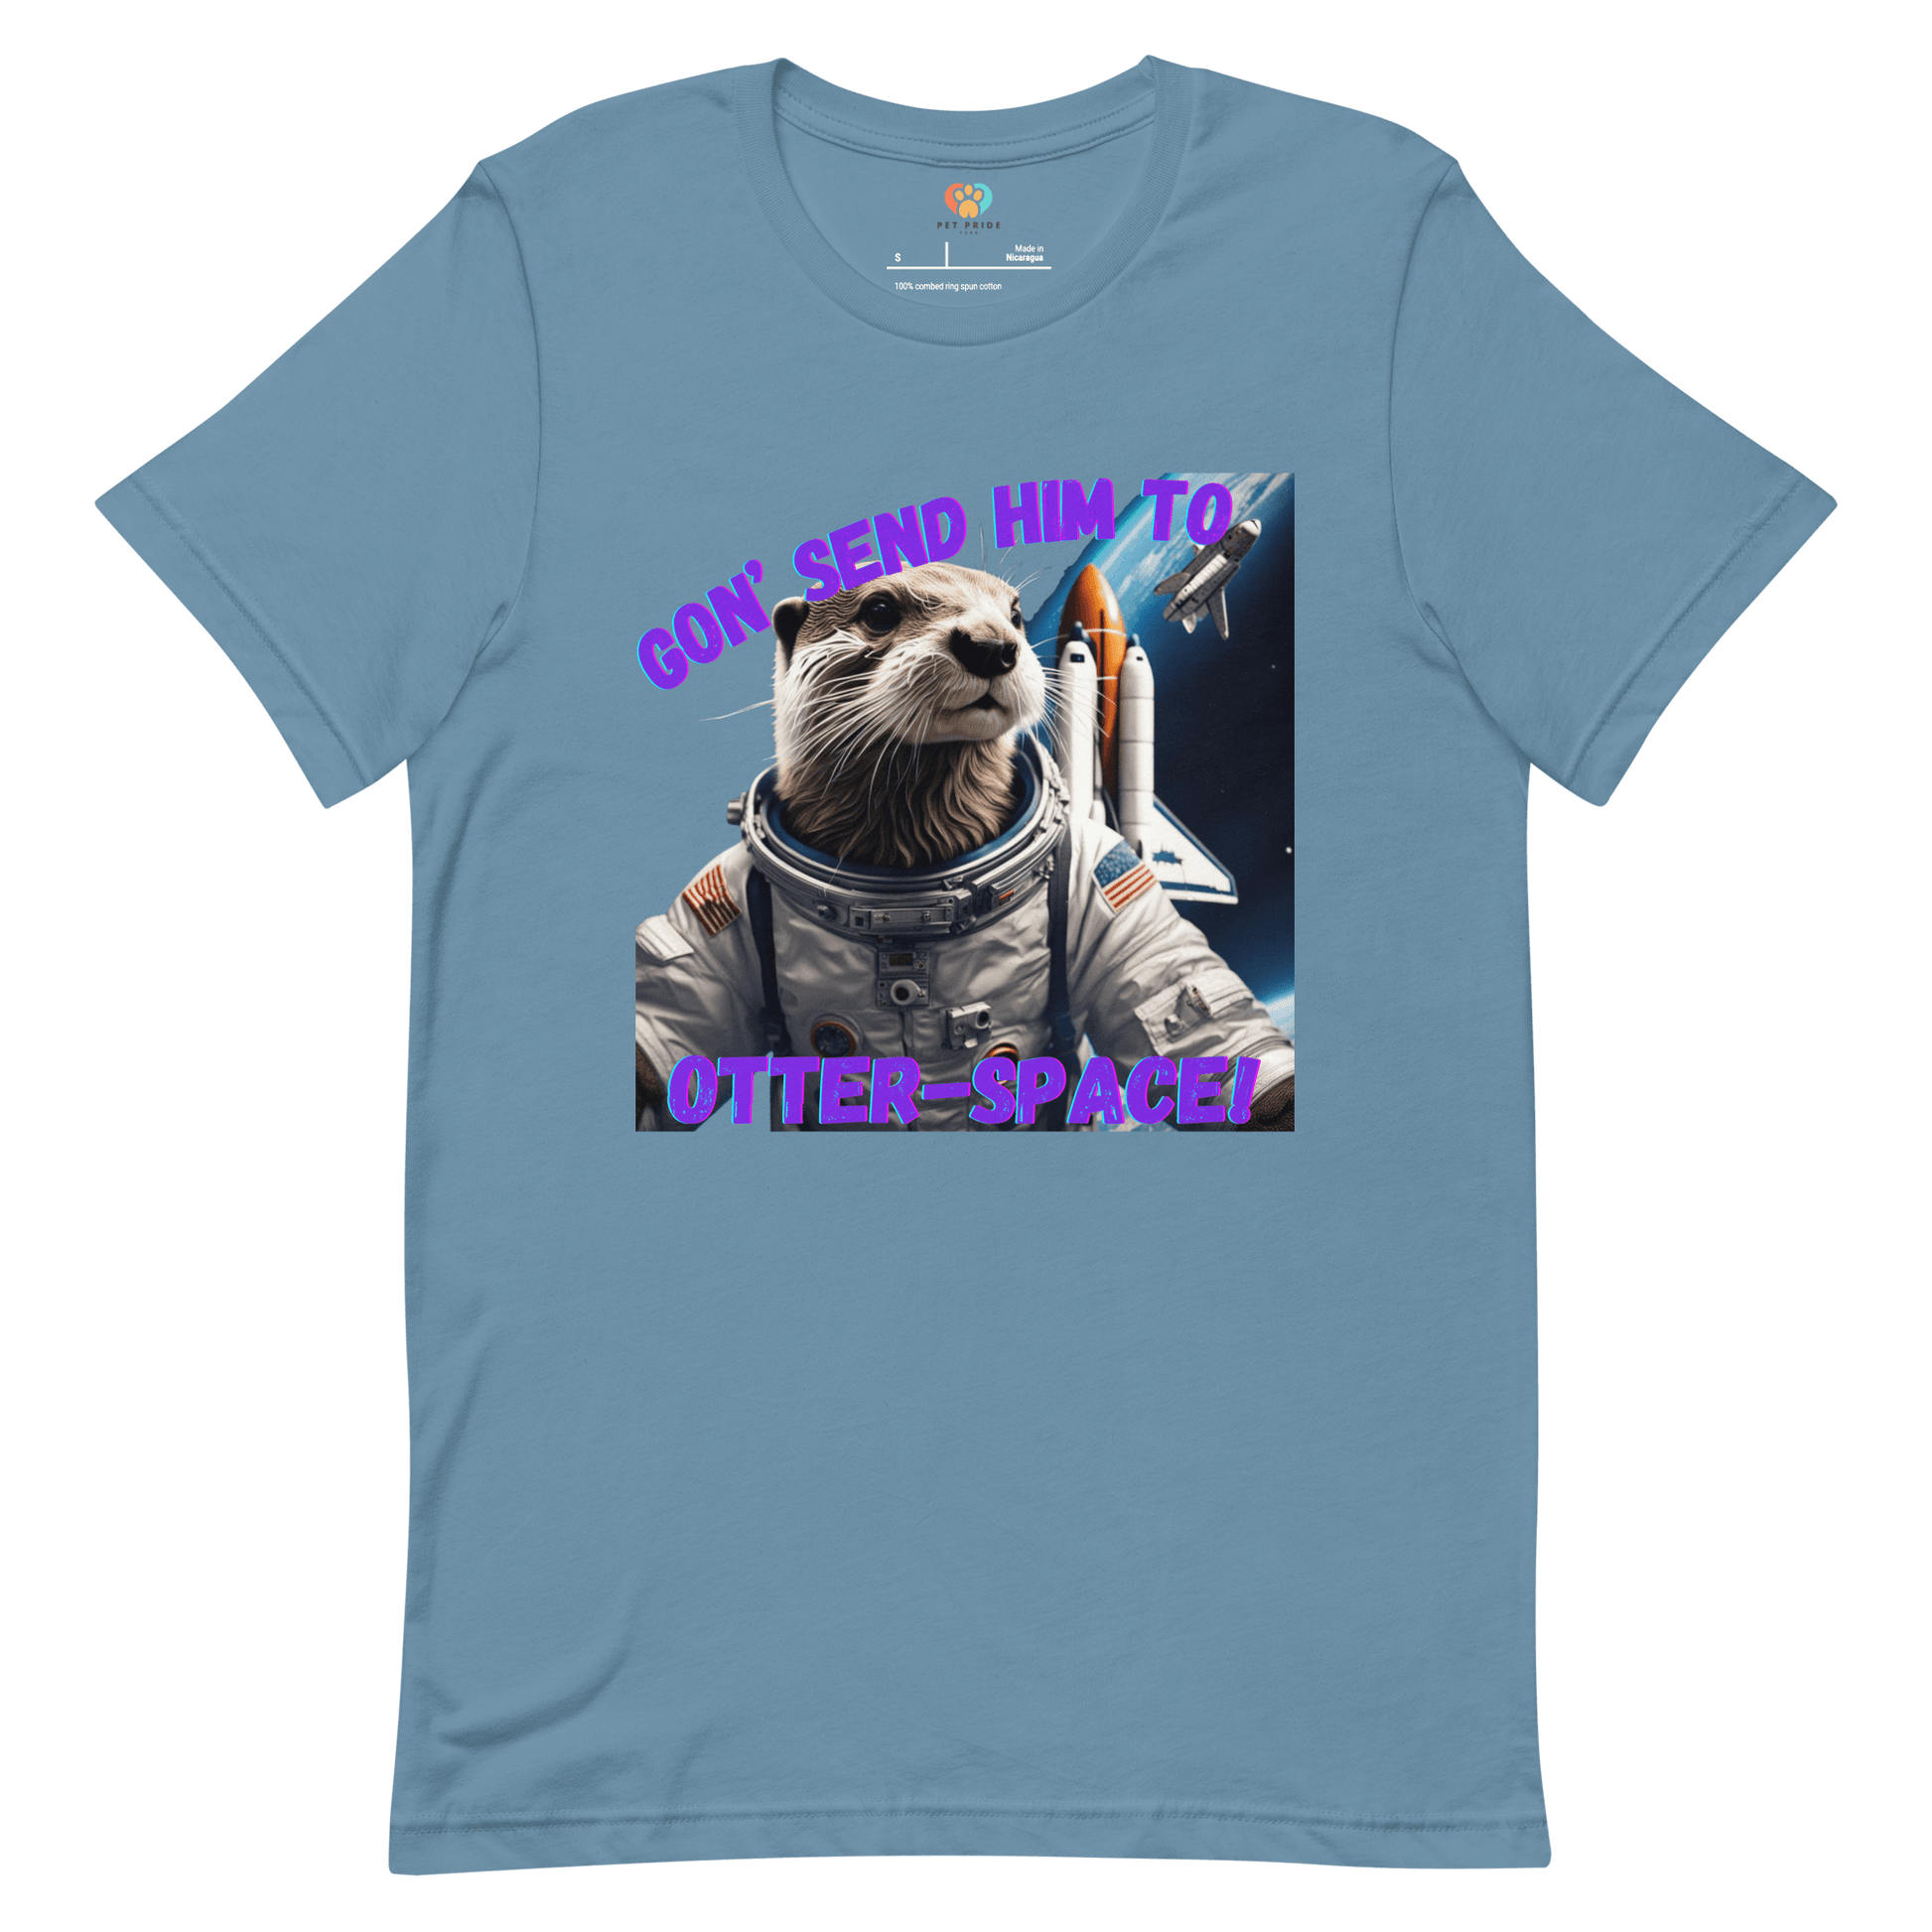 Gon' Send Him to Otter-Space Crew Neck T-Shirt - Pet Pride Tees